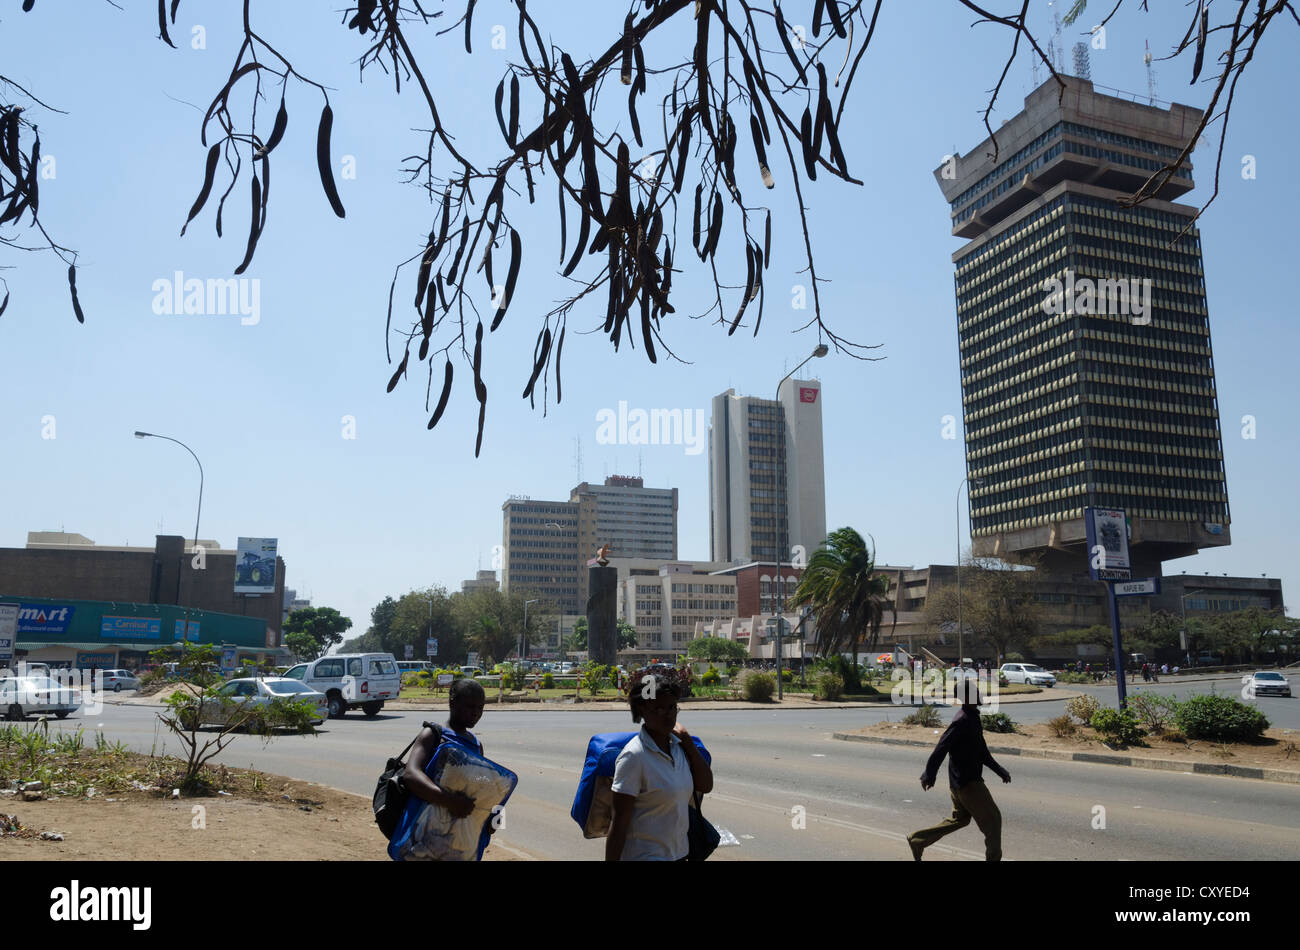 Findeco house and Cairo road. Downtown Lusaka. Zambia. Africa. Stock Photo